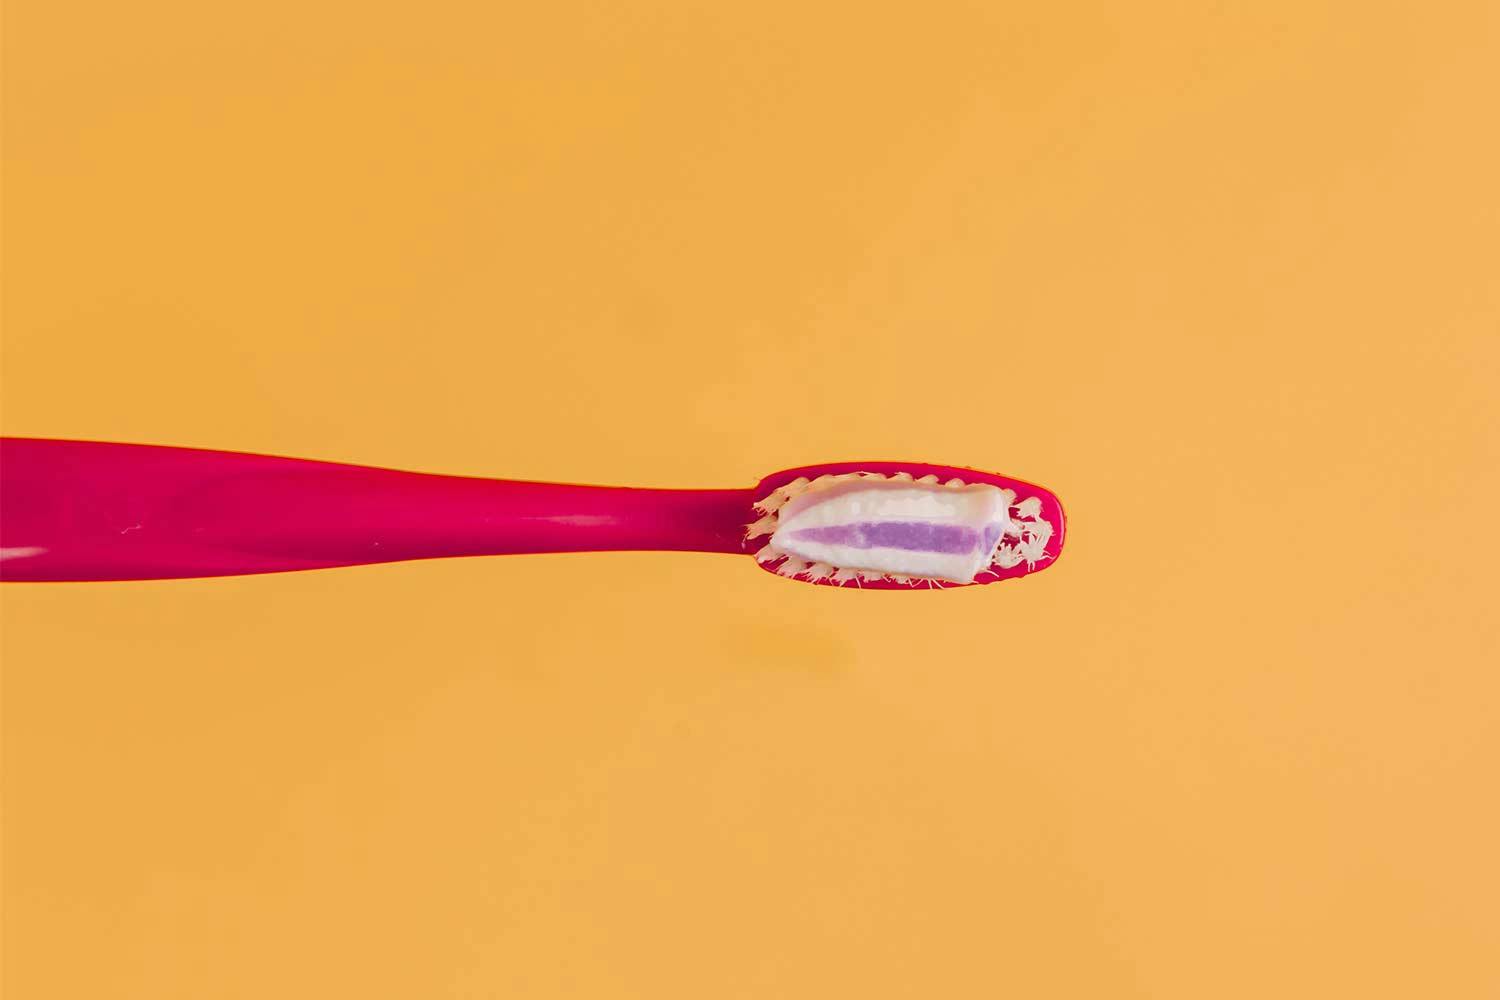 A dab of purple and white toothpaste on the bristles of a pink toothbrush, on a yellow background.